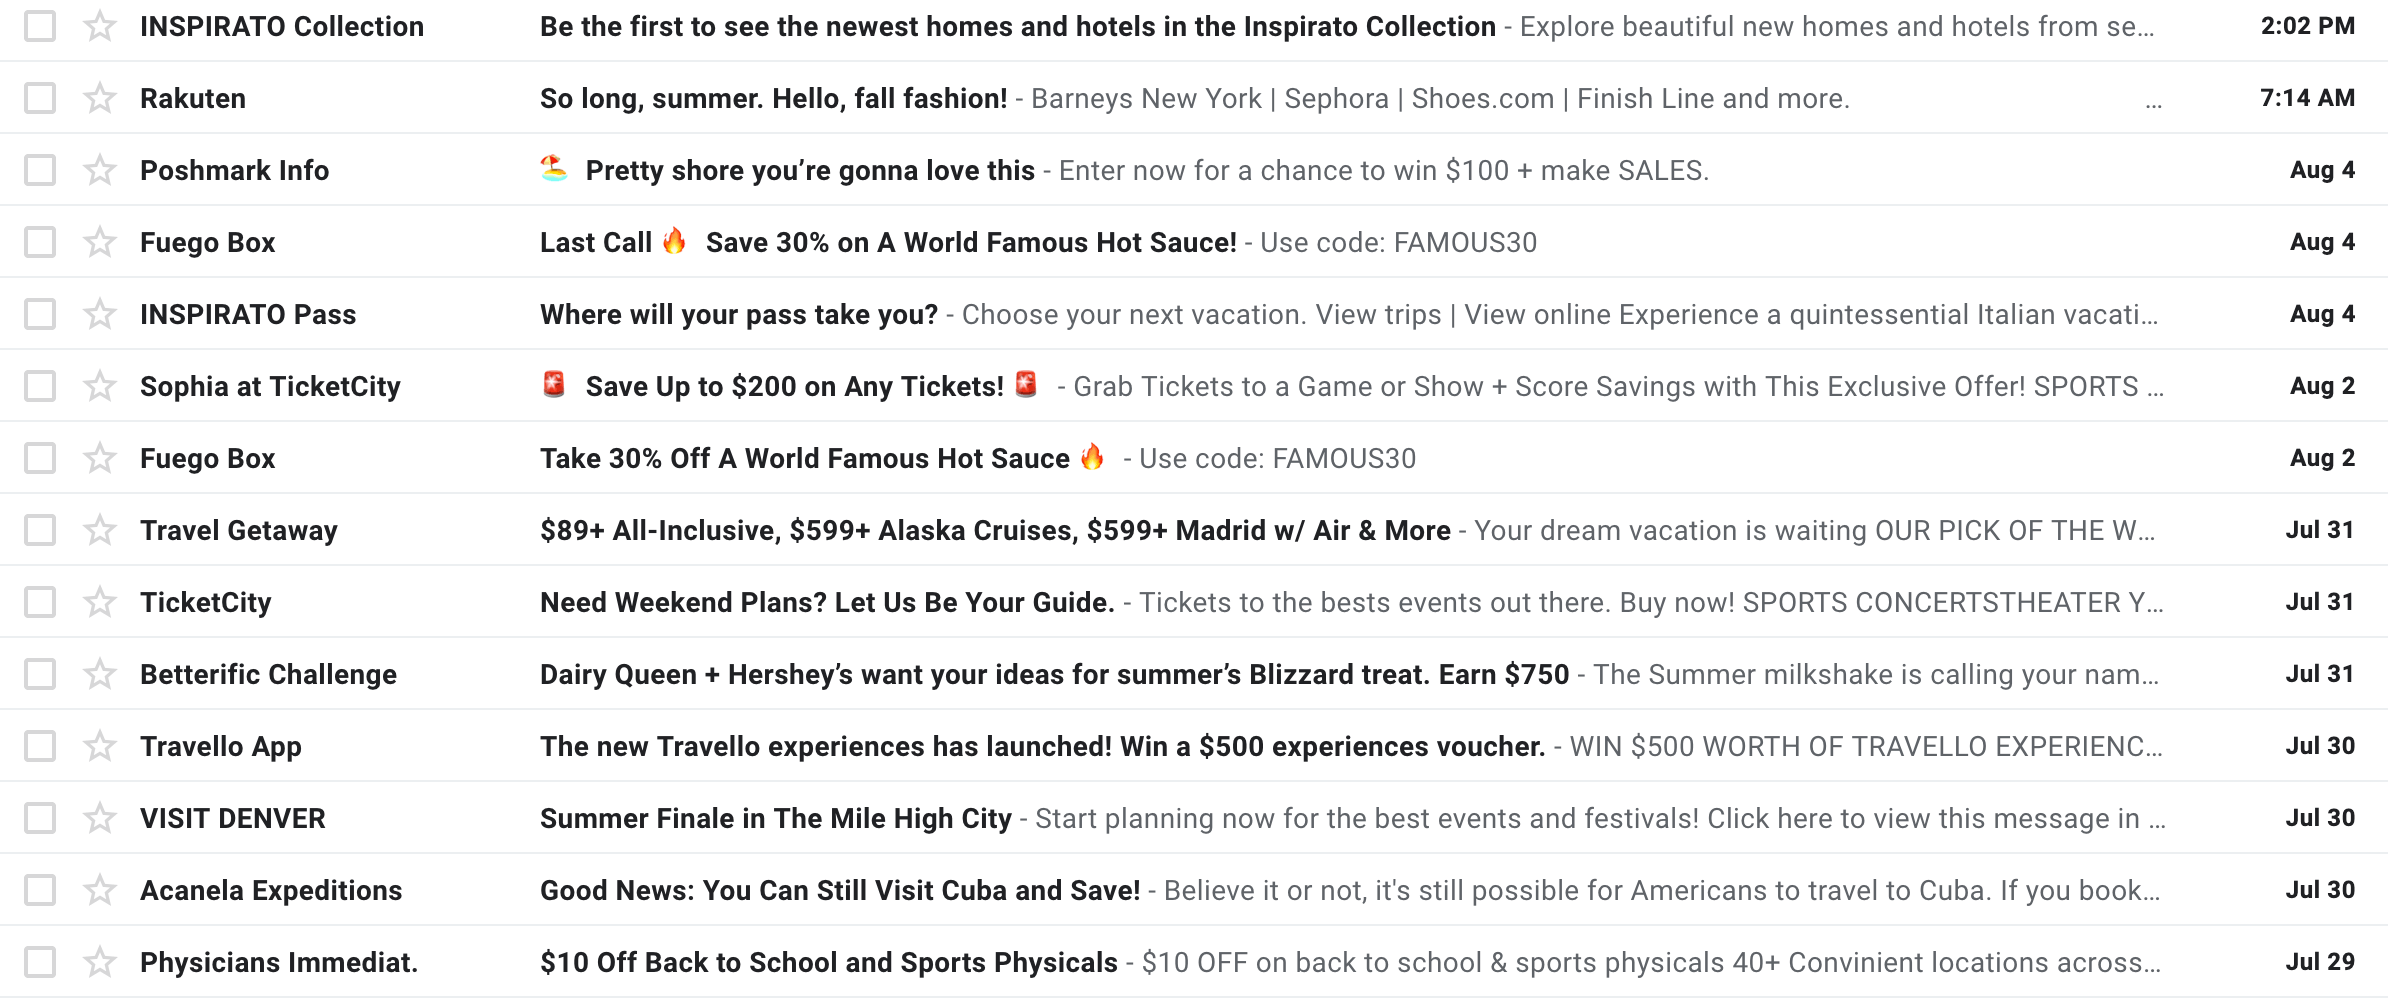 email inbox showing examples of spam emails using spam trigger words